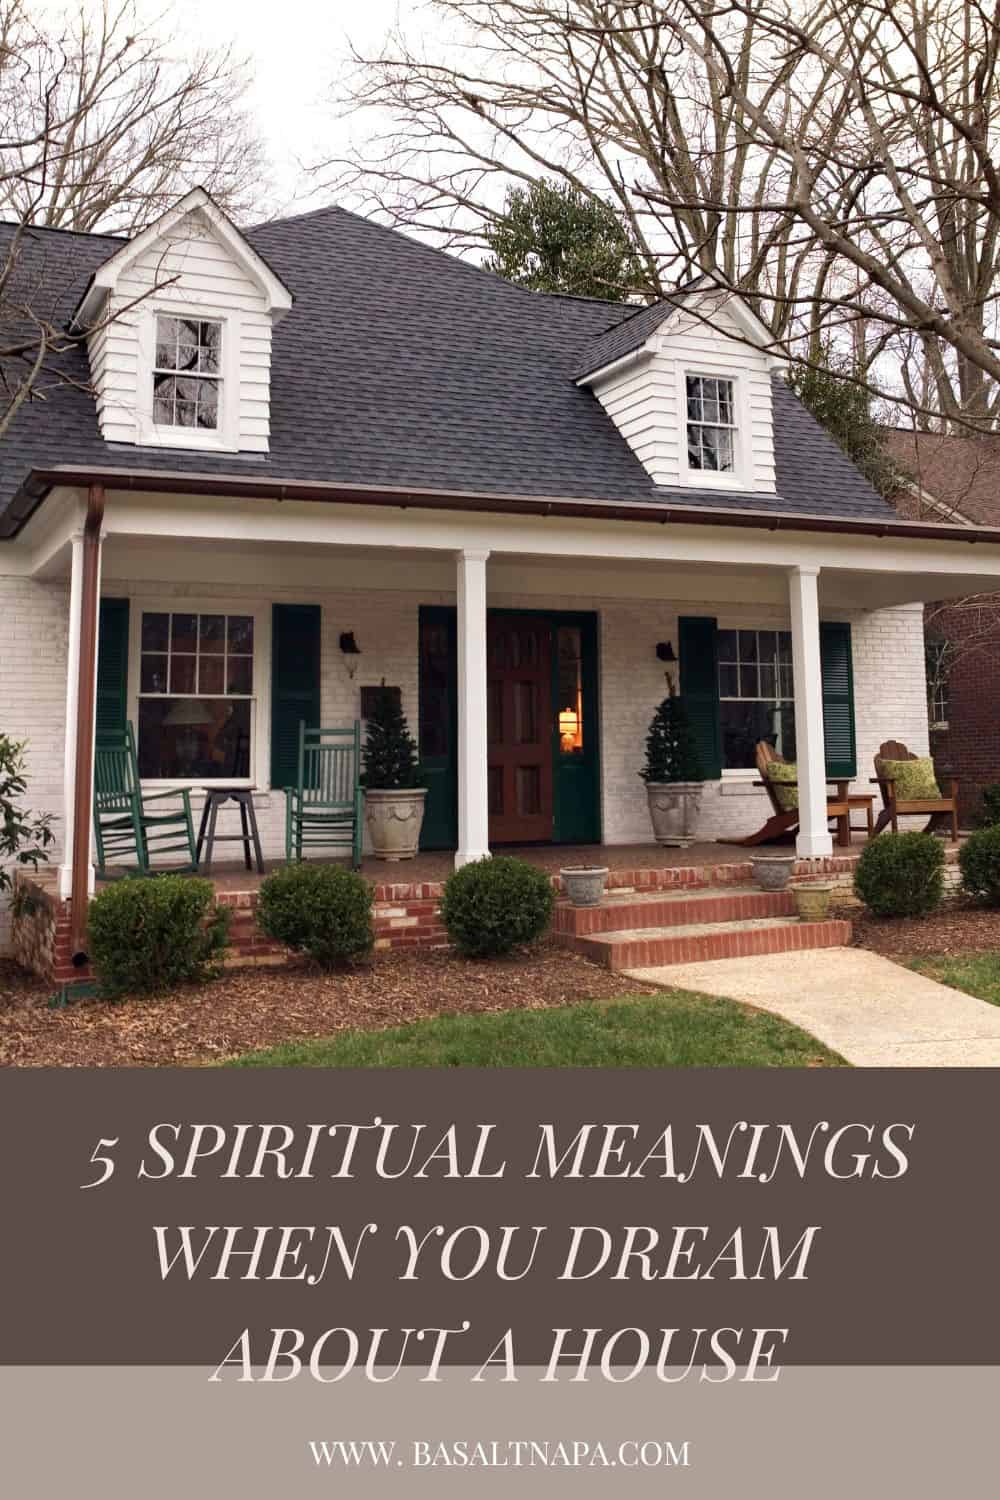 5 Spiritual Meanings When You Dream About A House